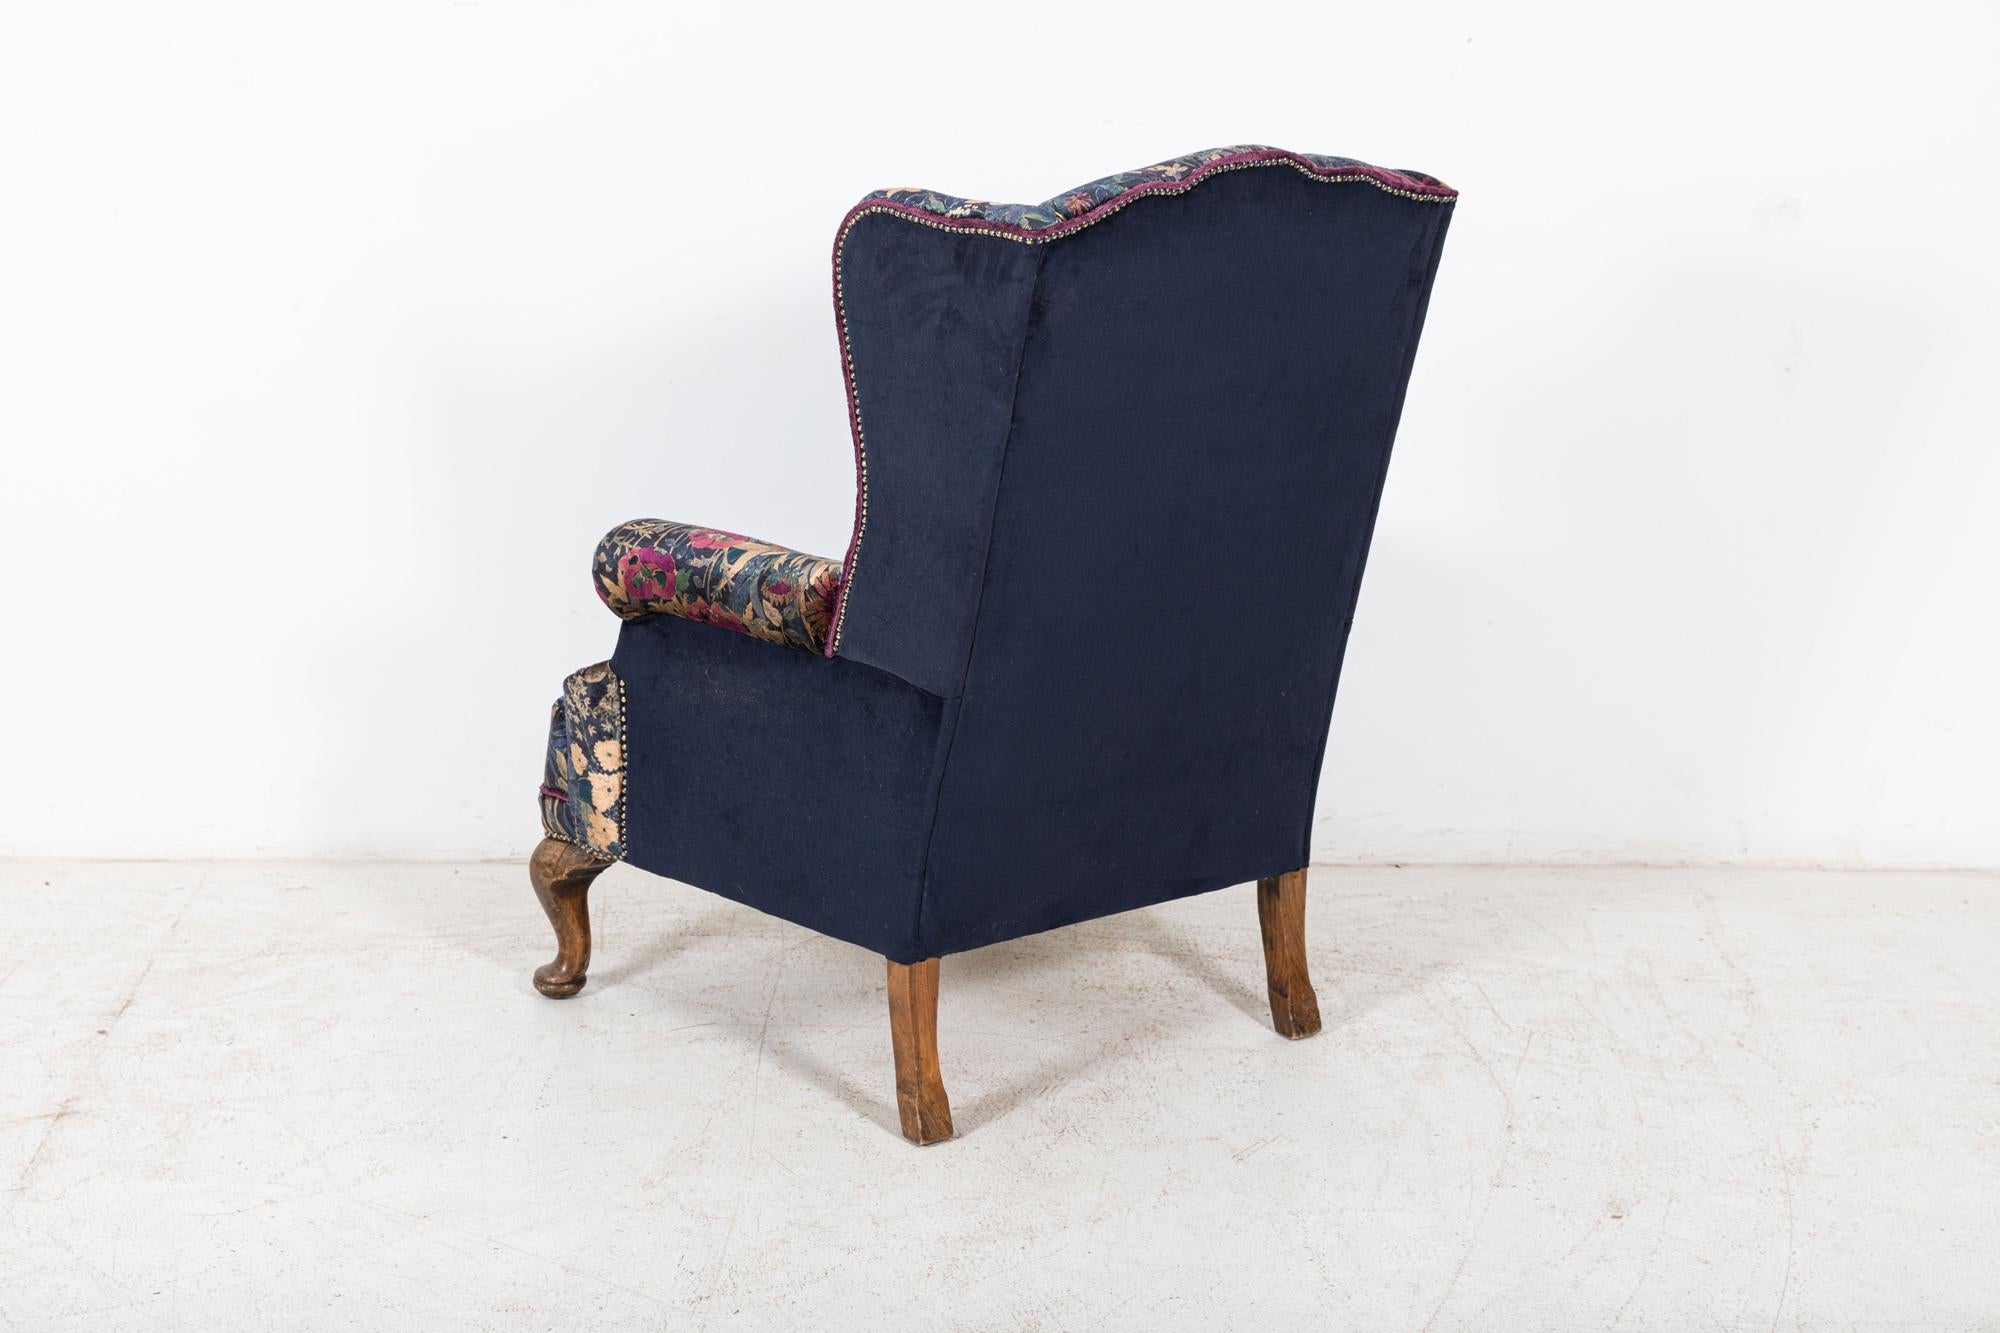 Oak 19thC English Mahogany Wingback Armchair Re-Upholstered in Liberty For Sale